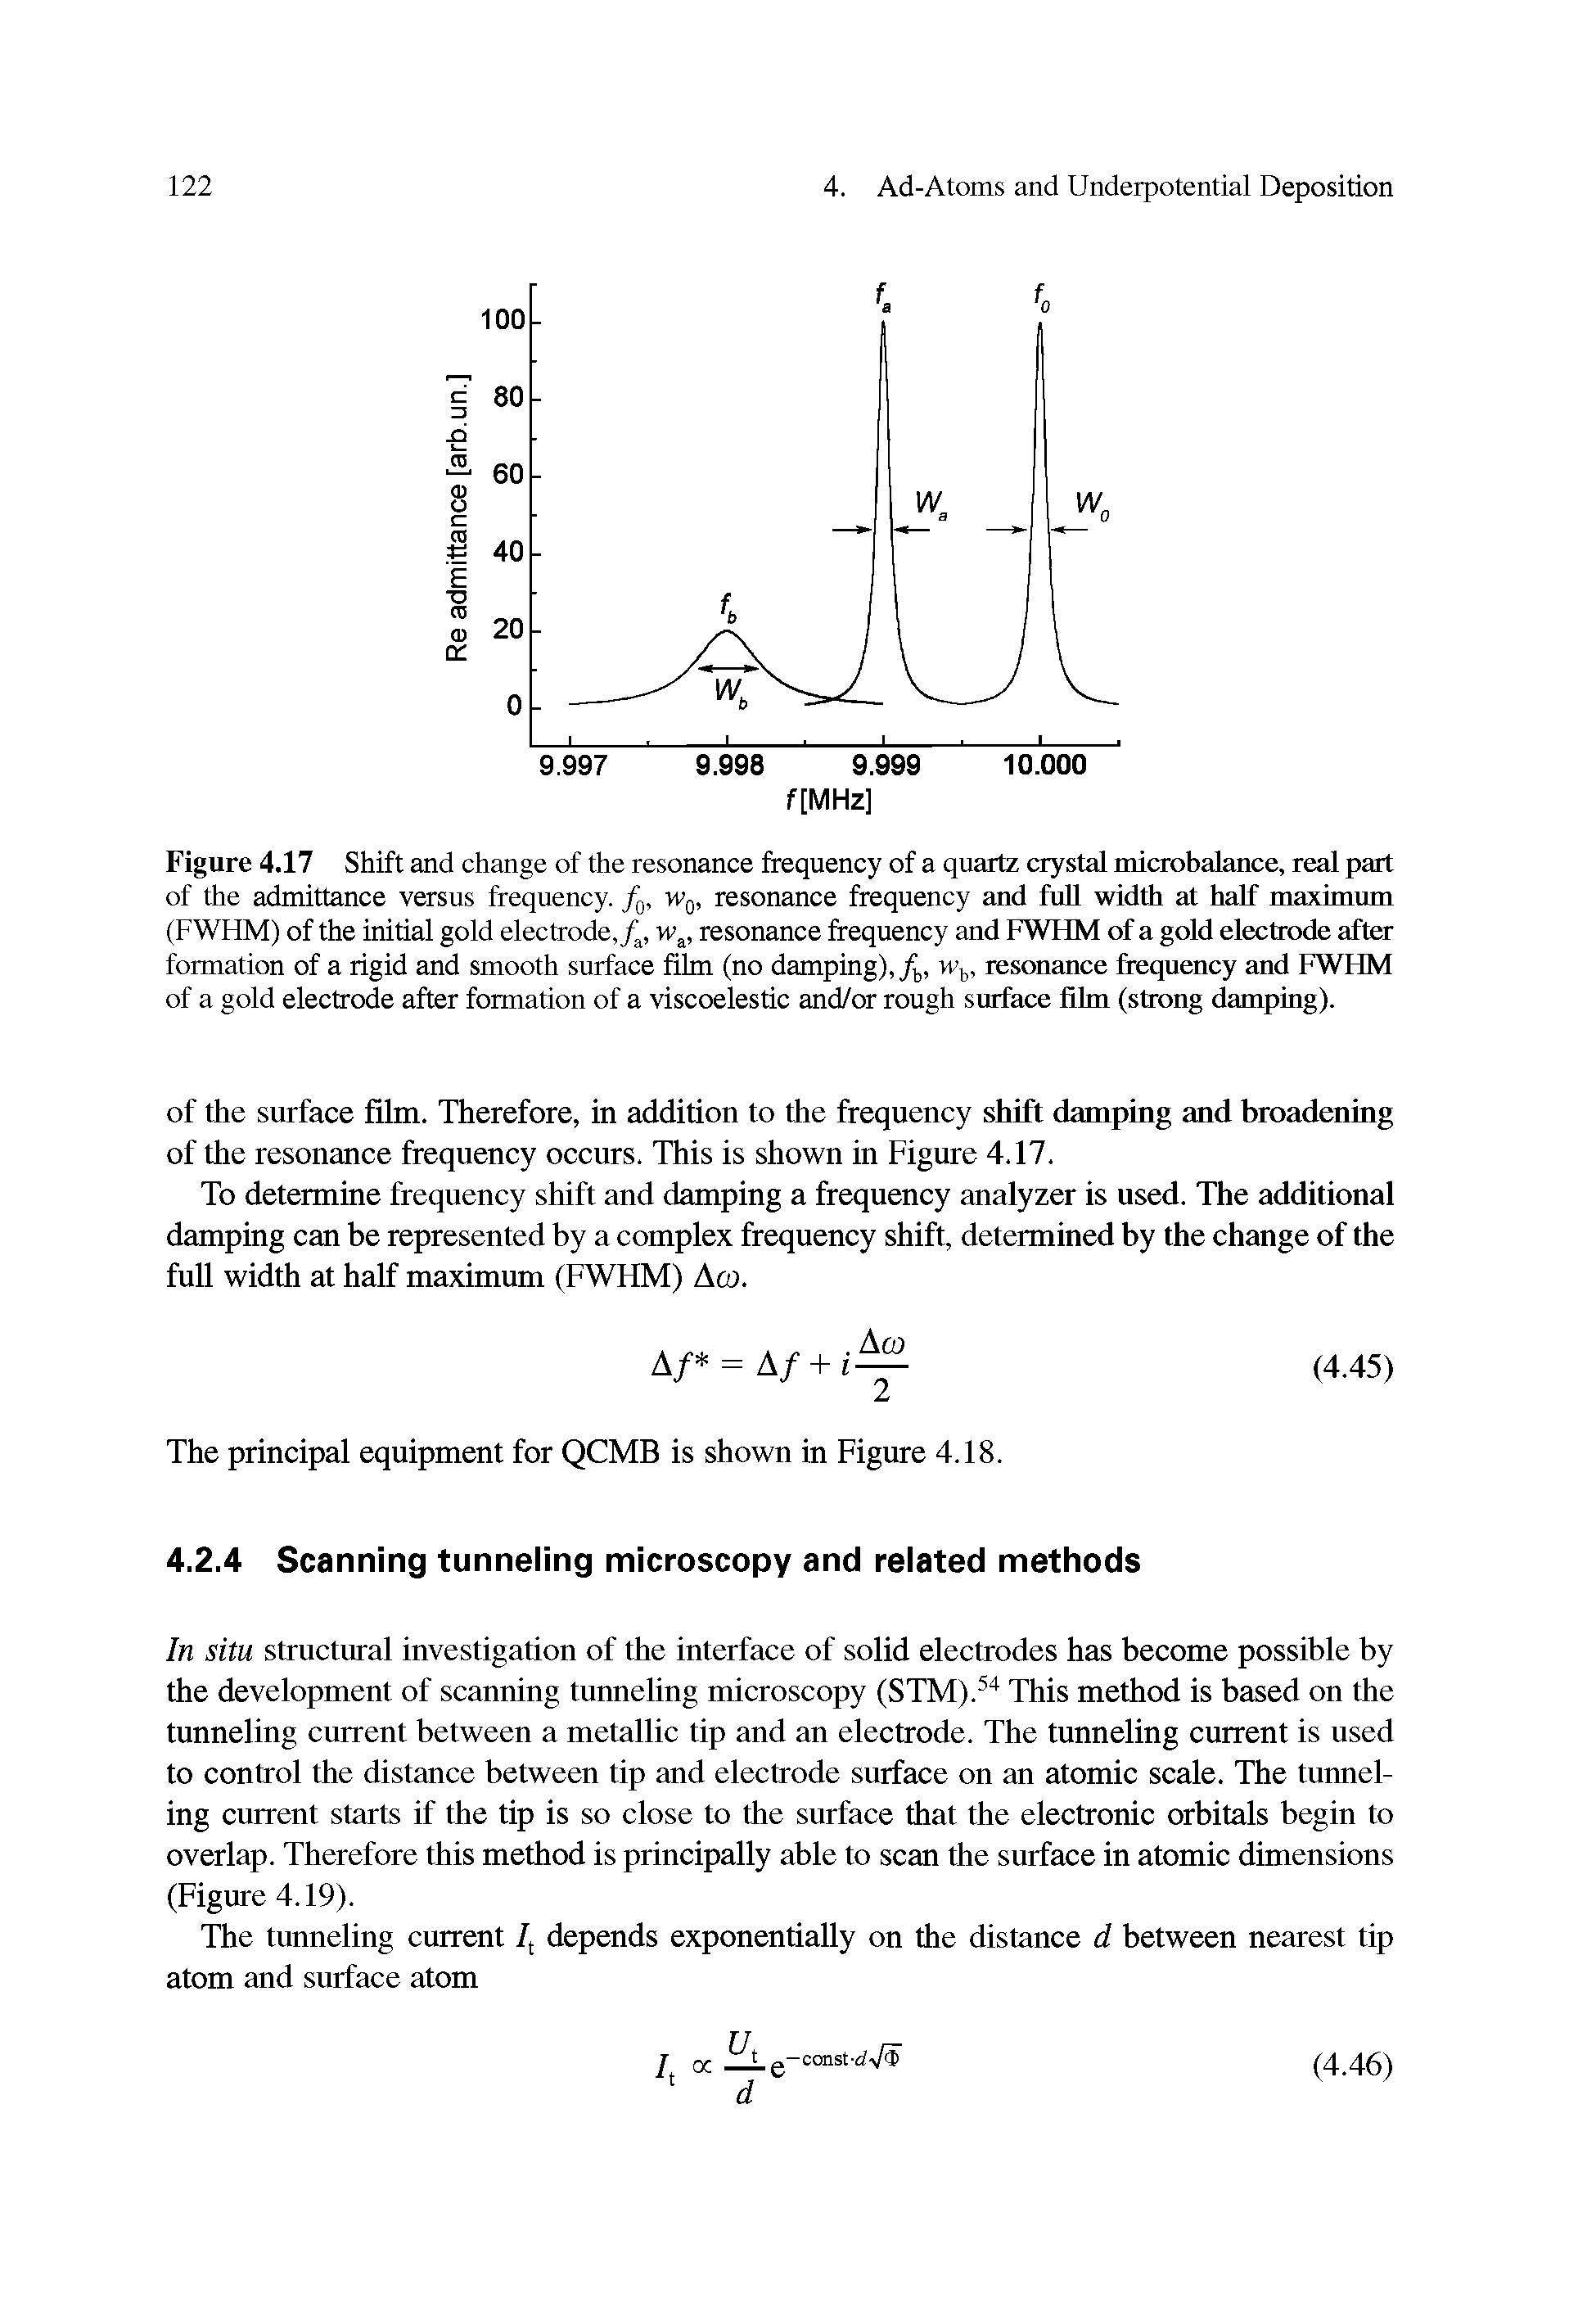 Figure 4.17 Shift and change of the resonance frequency of a quartz crystal microbalance, real part of the admittance versus frequency, /q, Wq, resonance frequency and full width at half maximum (FWHM) of the initial gold electrode,/j, w, resonance frequency and FWHM of a gold electrode after formation of a rigid and smooth surface film (no damping), resonance frequency and FWHM of a gold electrode after formation of a viscoelestic and/or rough surface film (strong damping).